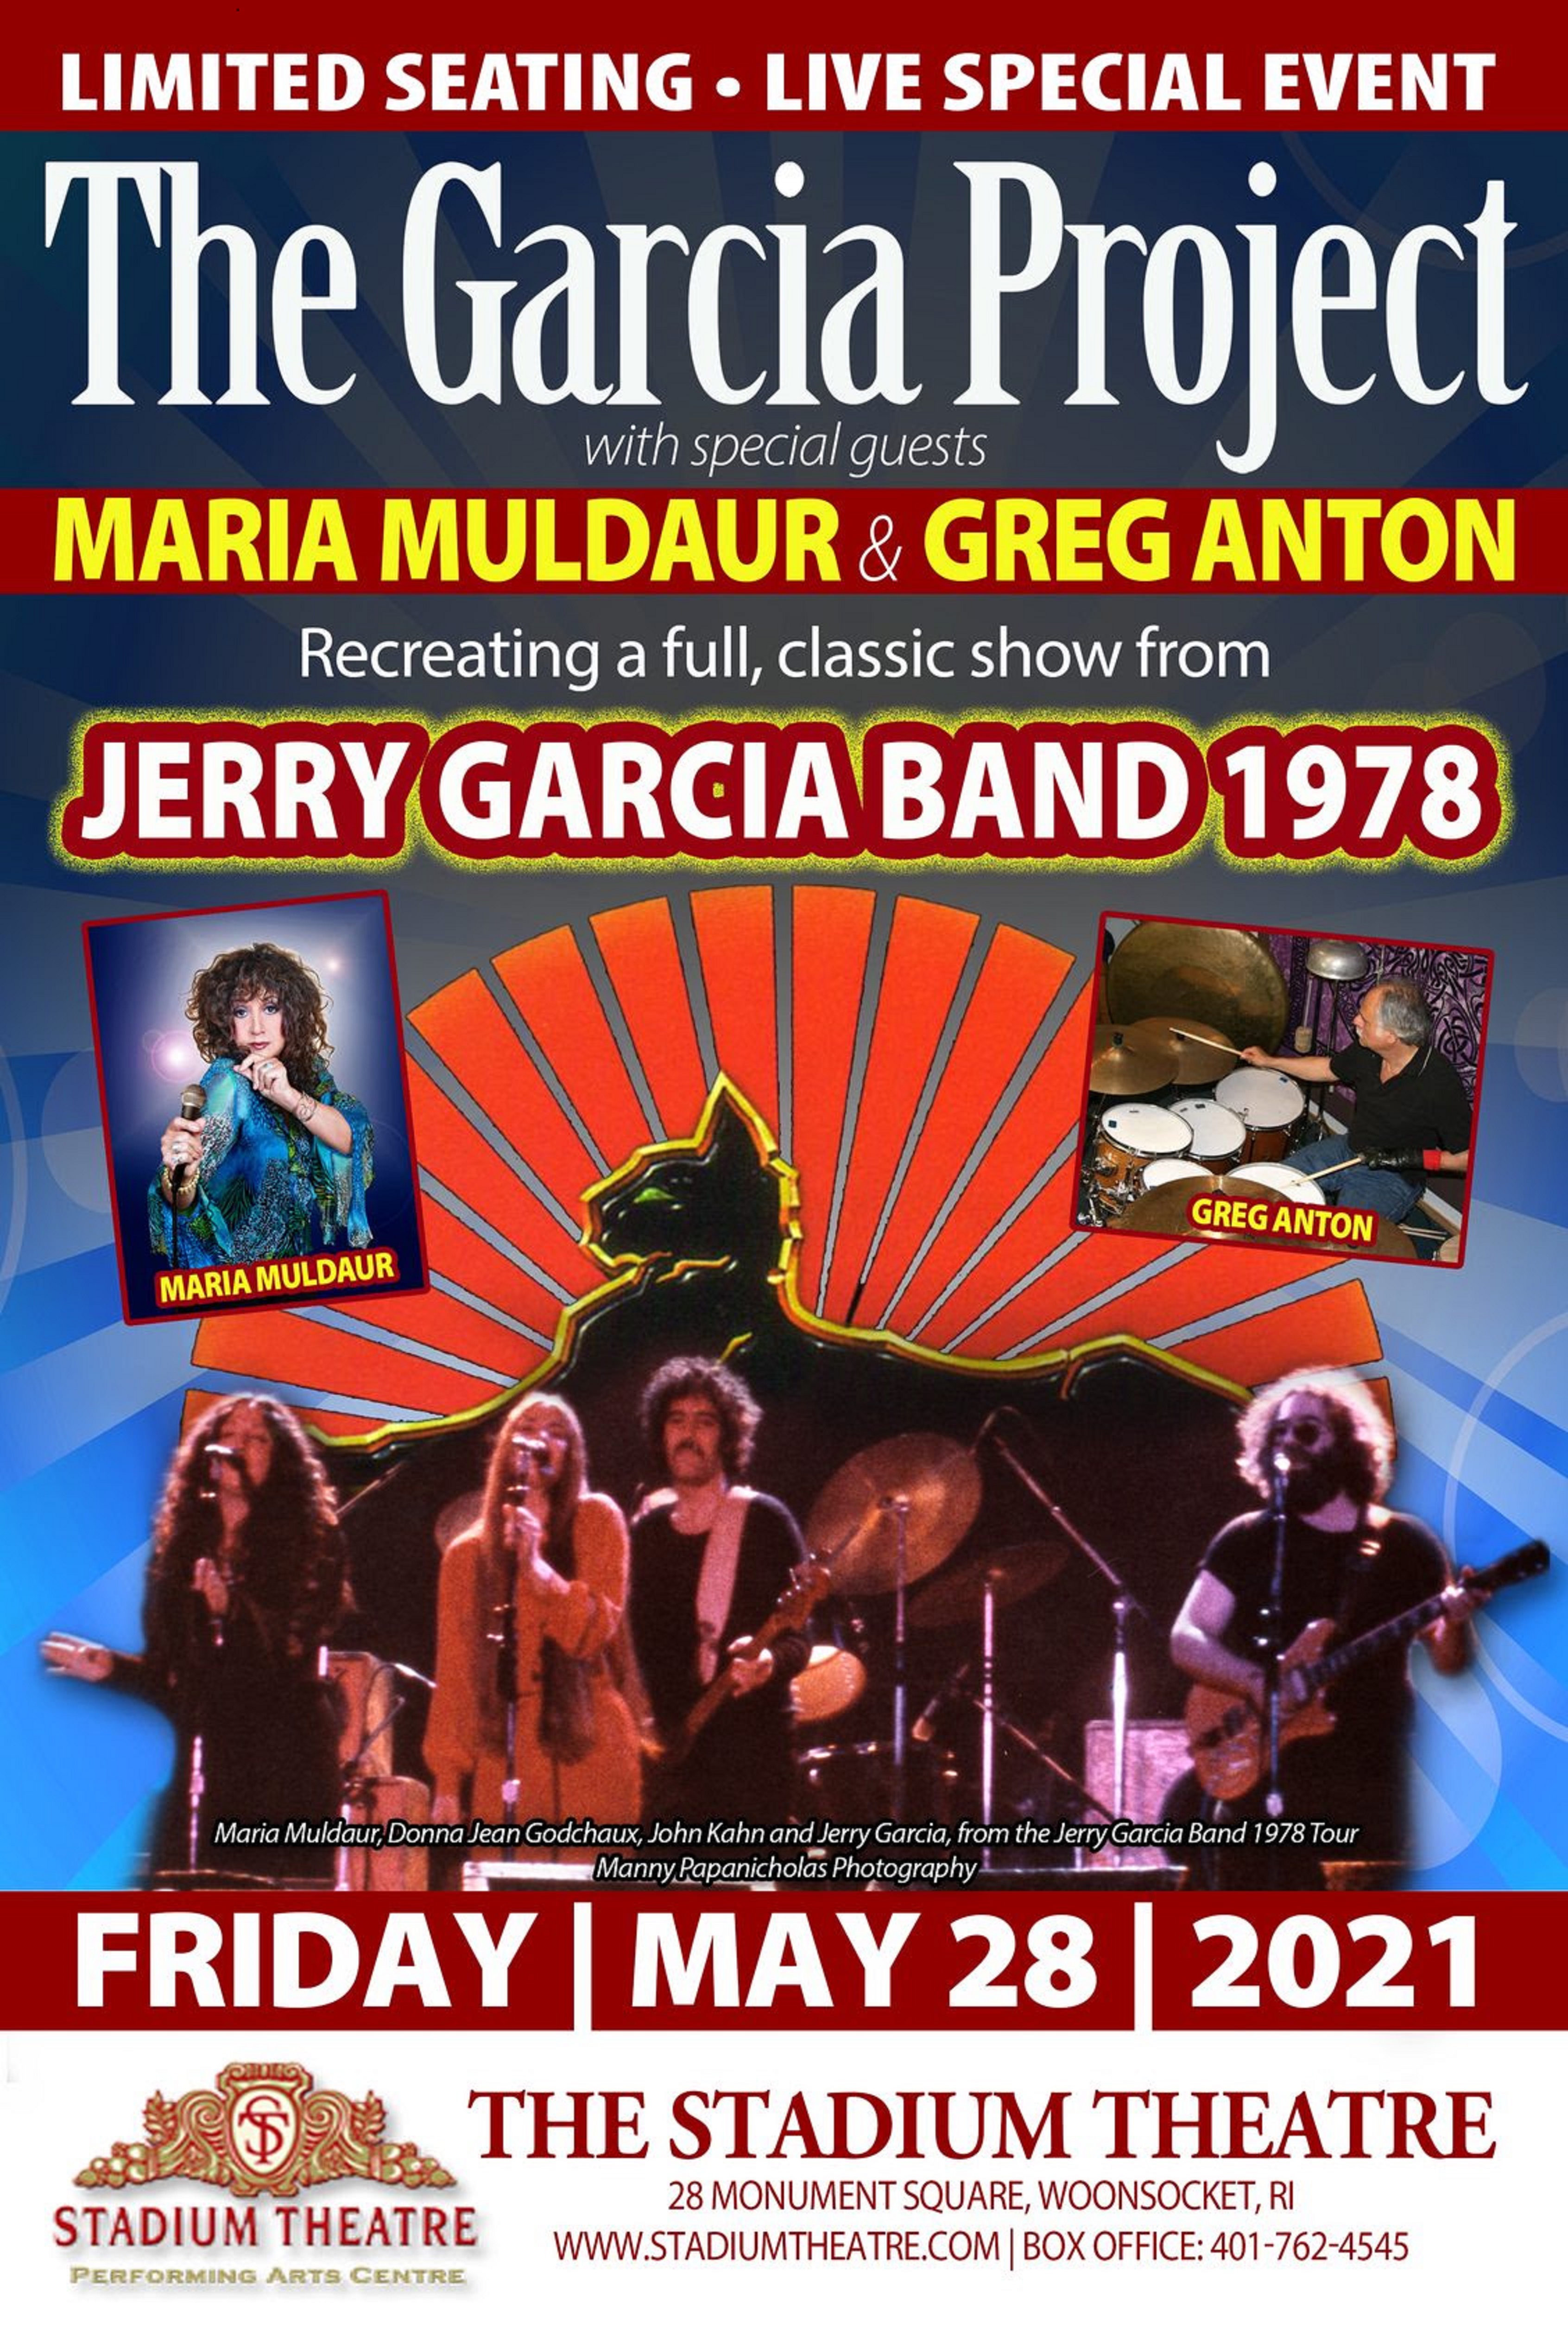 Maria Muldaur & Greg Anton to join The Garcia Project for a 1978 Jerry Garcia Band show recreation